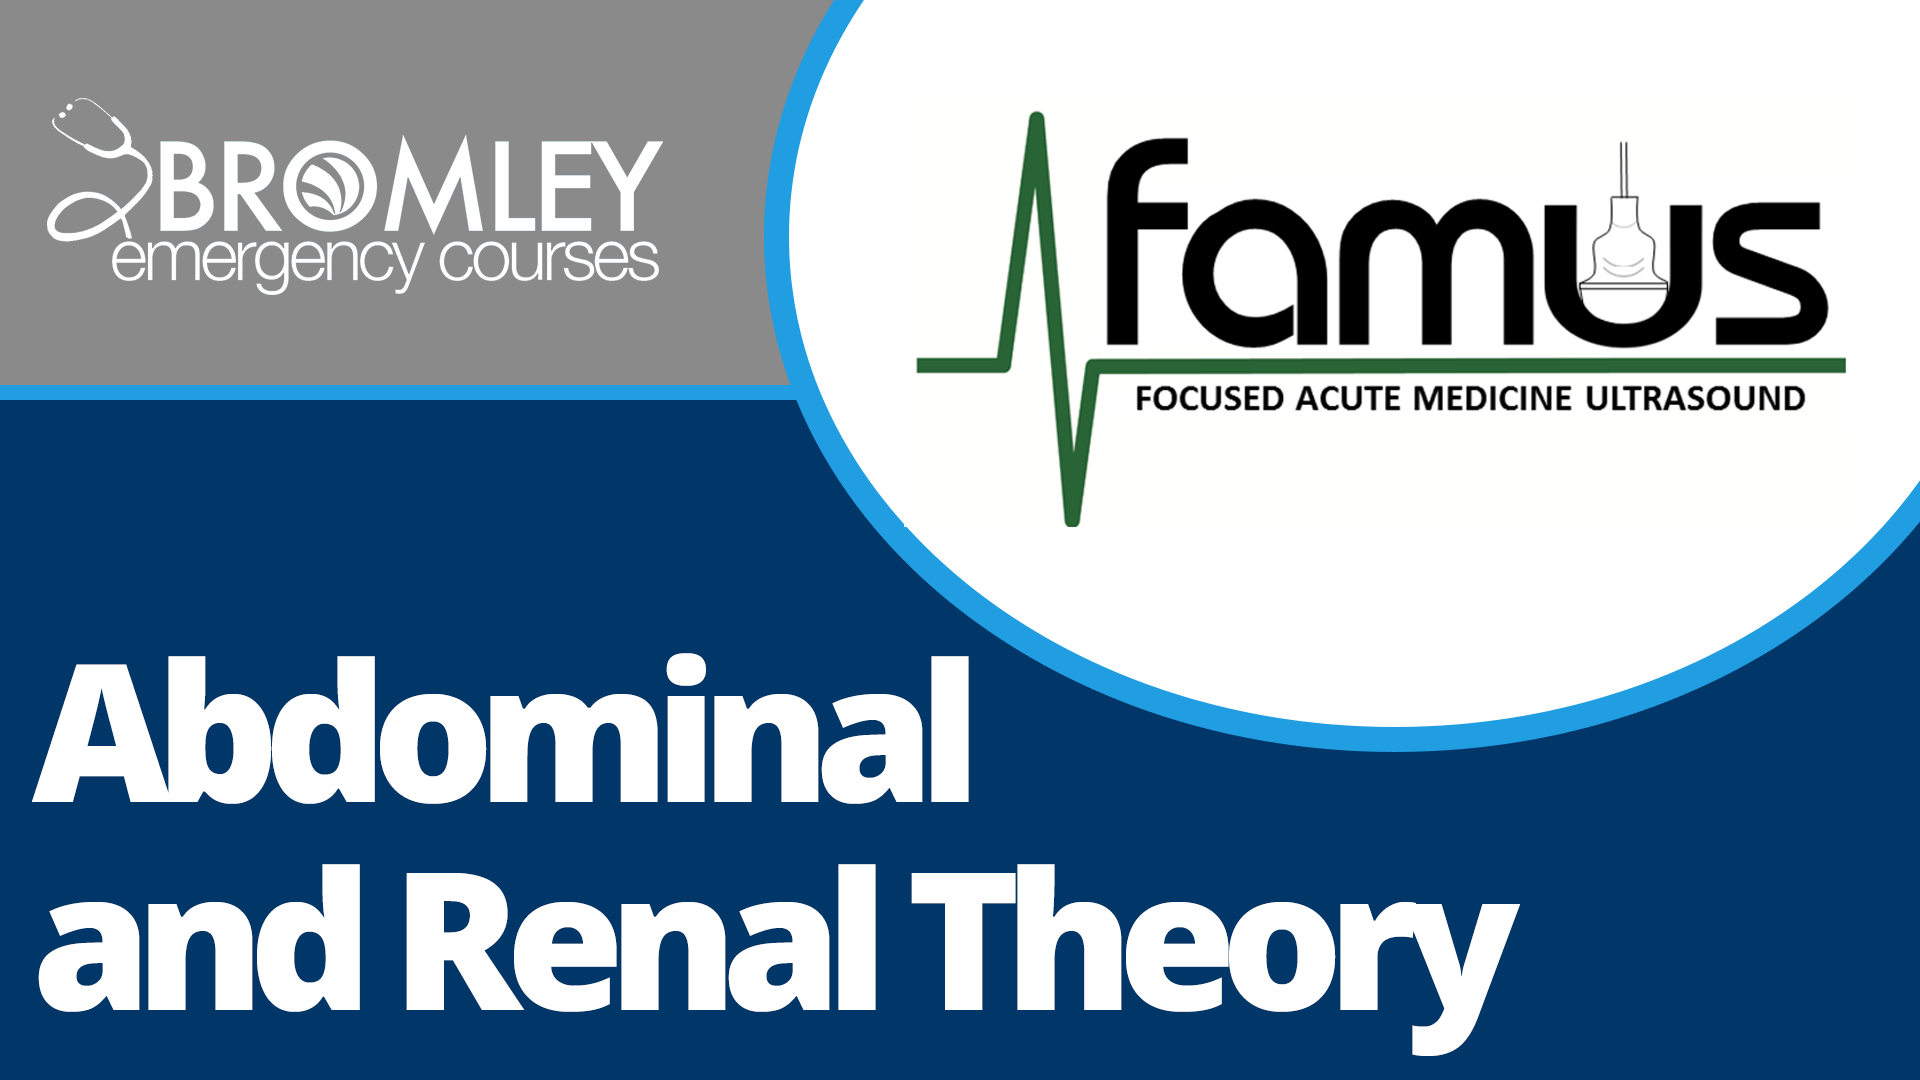 Abdominal-and-renal-theory